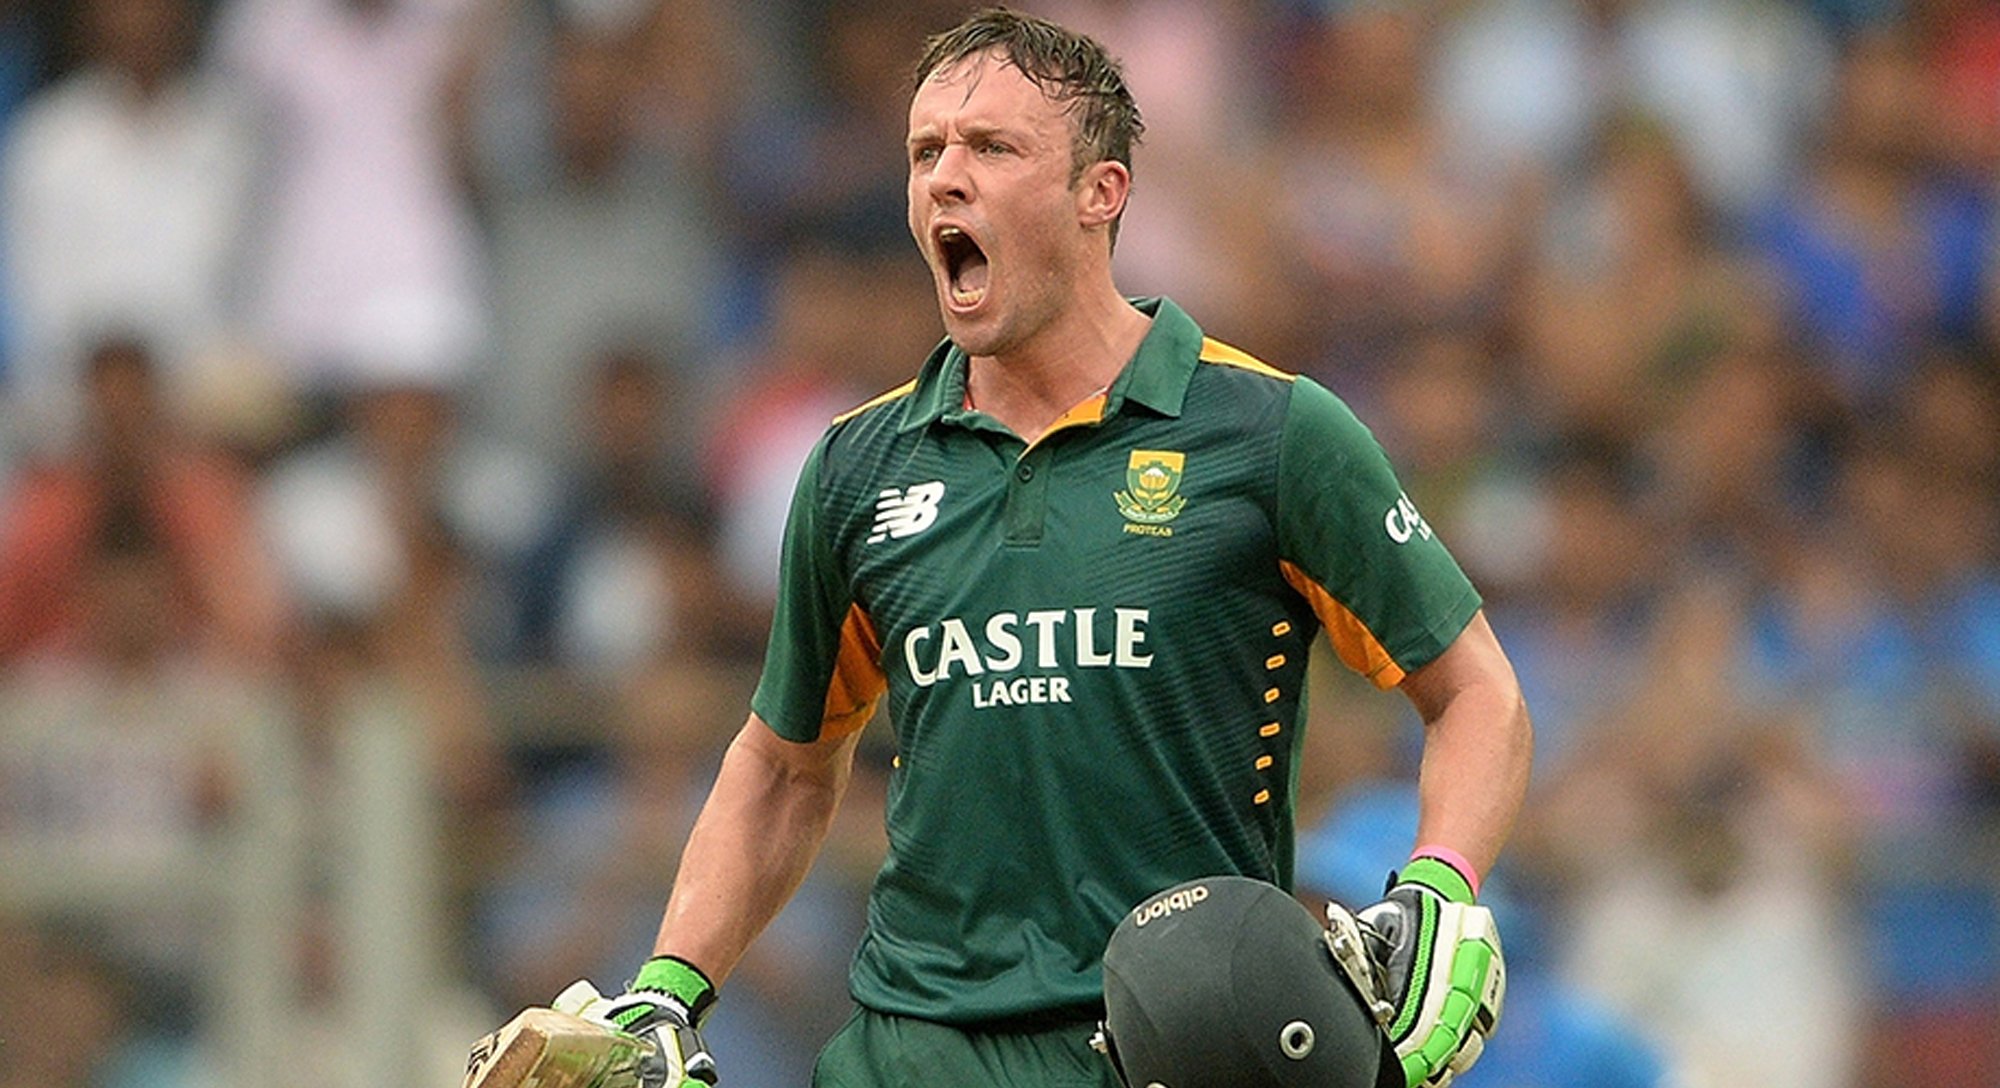 psl4 injury prevents ab de villiers from visiting pakistan